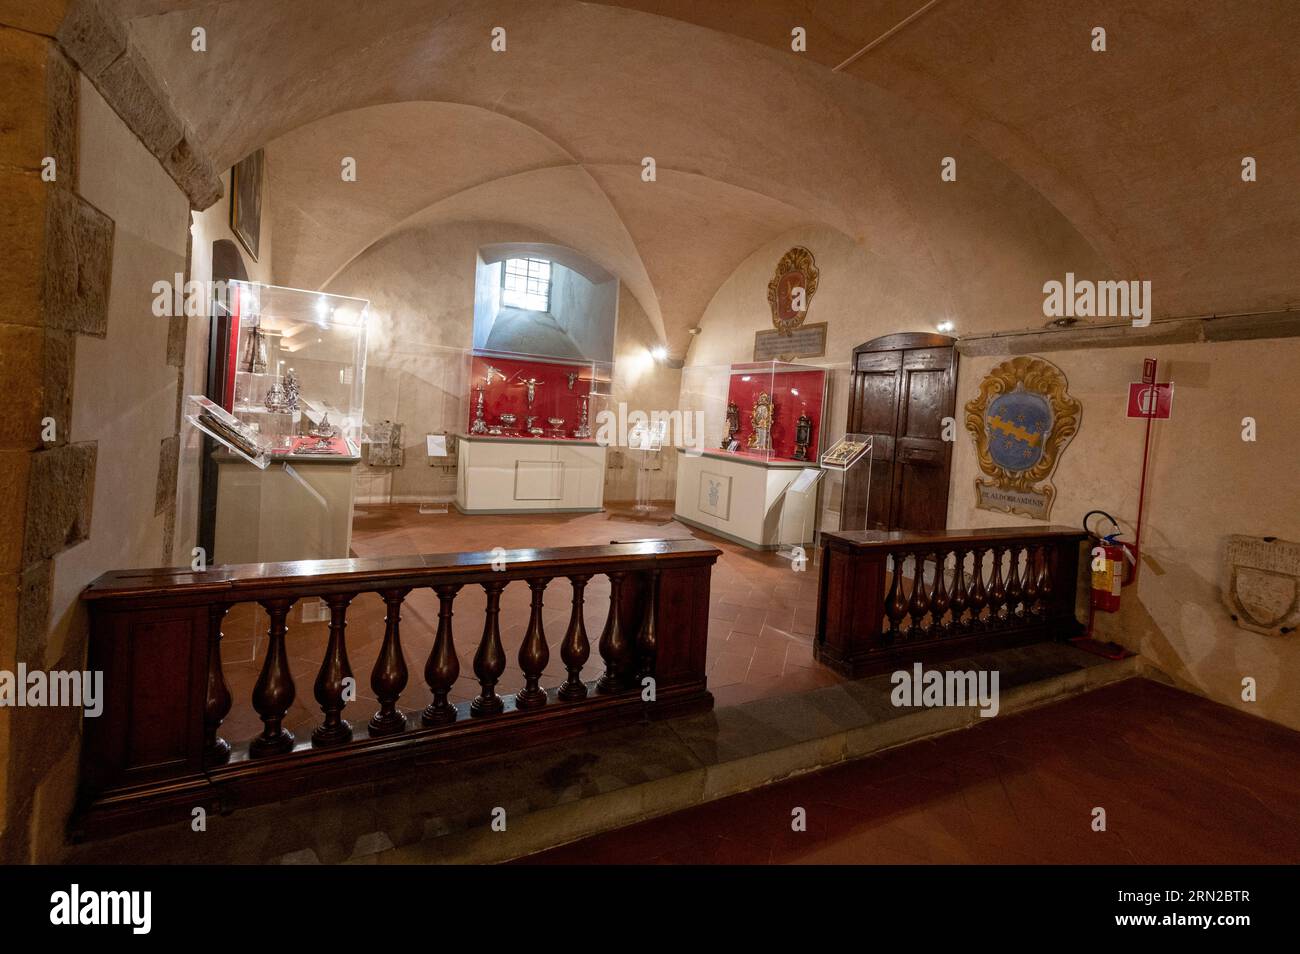 The Medici Chapel Crypt, a basement under the courtyard of the Cloister of St. Antoninus part of the Basilica di San Lorenzo (Church of St. Lawrence) in F Stock Photo